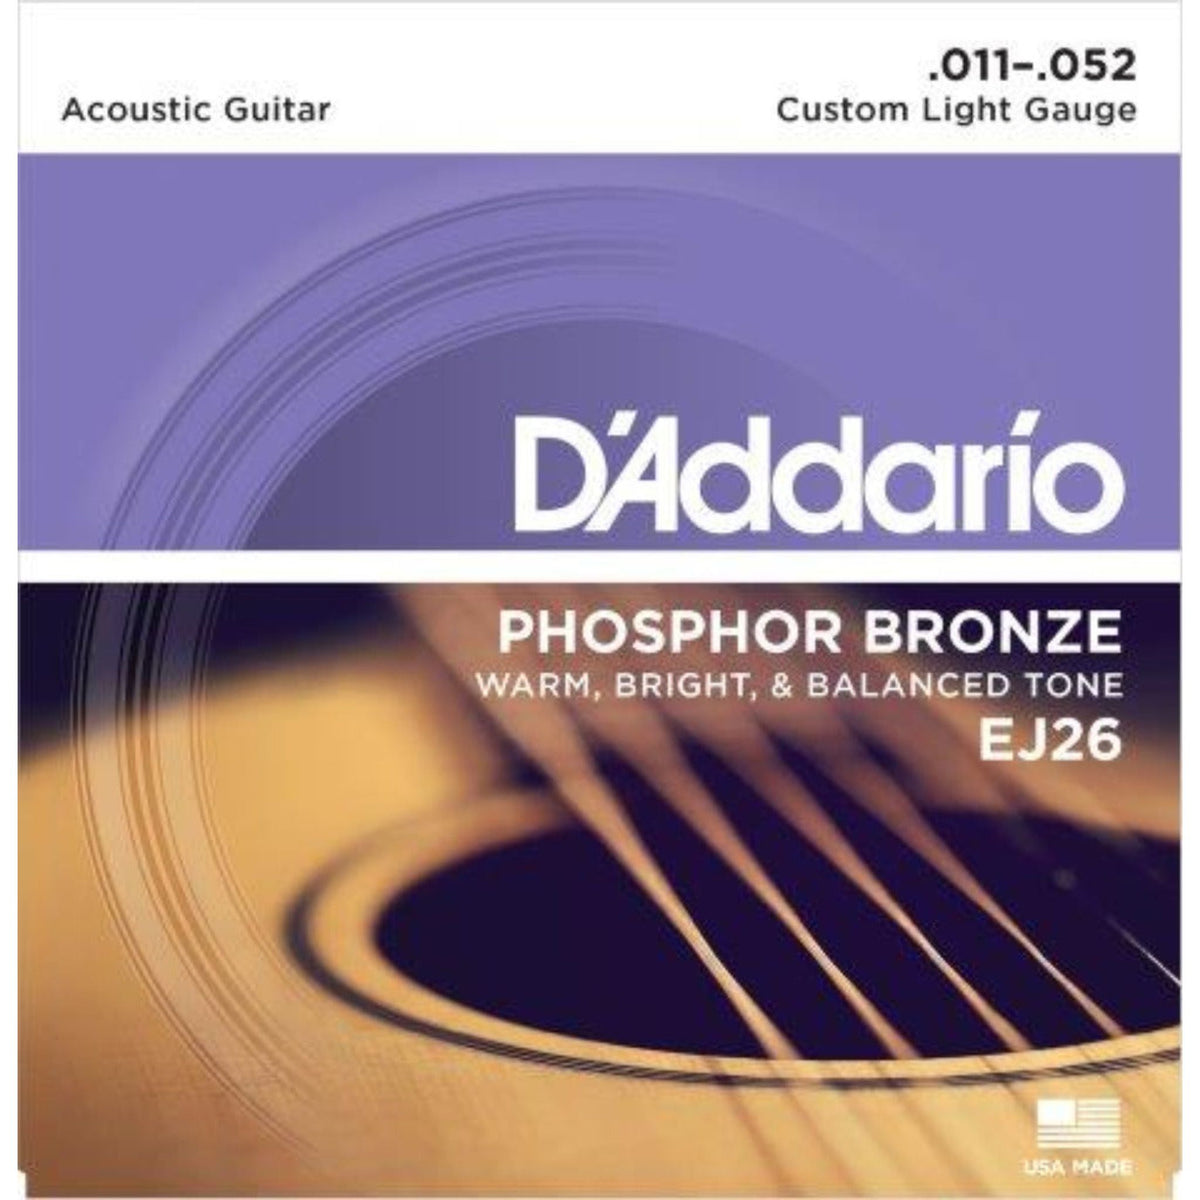 Referred to as Custom Light, EJ26 strings are a D&#39;Addario original hybrid gauge and a comfortable compromise for players who want the depth and projection of light gauge bottom strings, but slightly less tension on the high strings for easy bending.